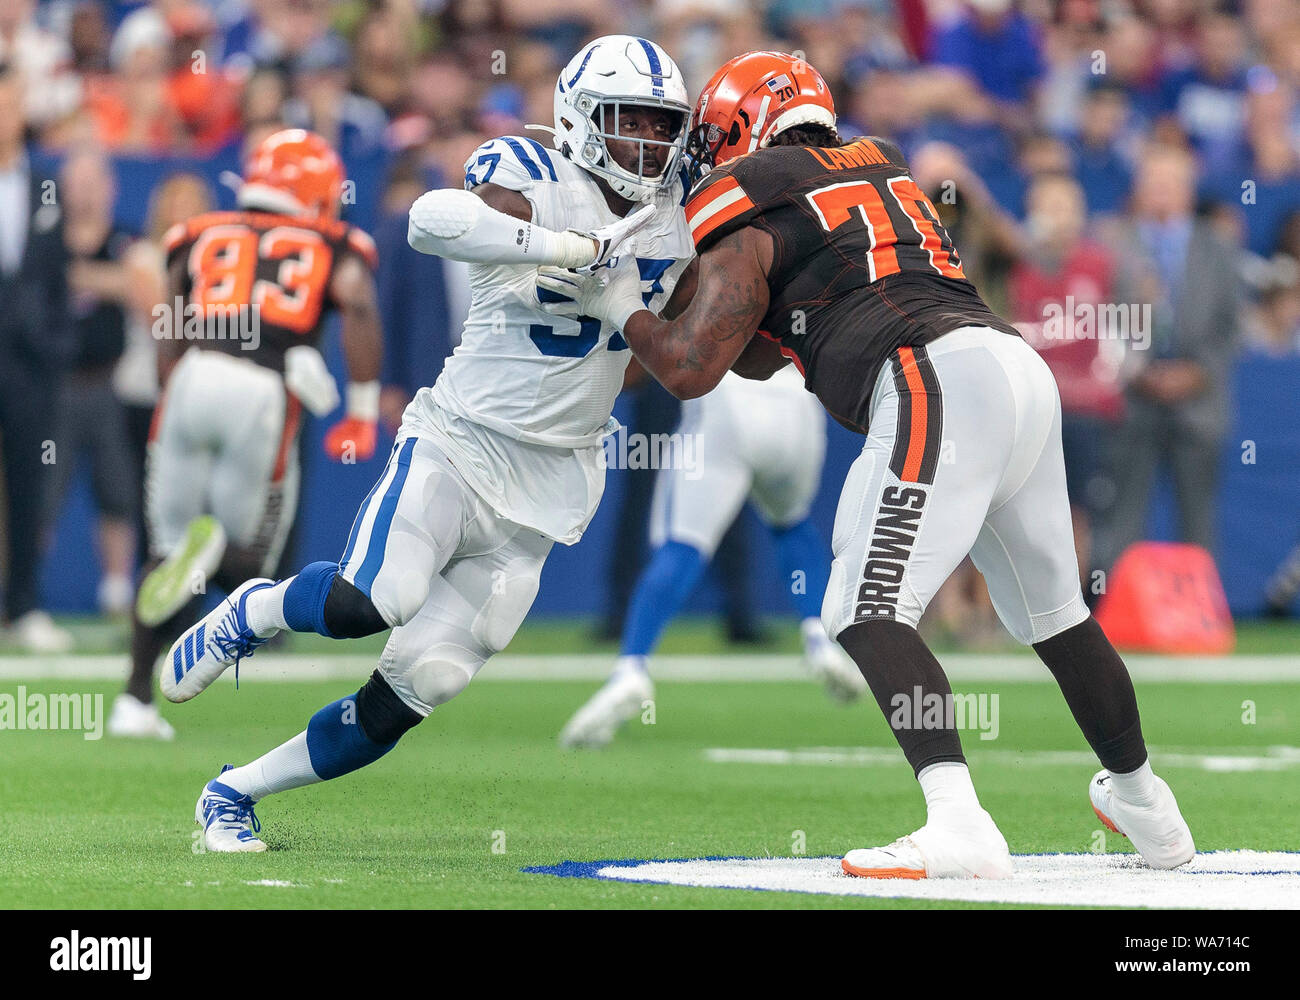 Indianapolis, USA. 17 August 2019.  Indianapolis Colts defensive lineman Kemoko Turay (57) and Cleveland Browns offensive lineman Kendall Lamm (70) battle at the line of scrimmage during NFL football preseason game action between the Cleveland Browns and the Indianapolis Colts at Lucas Oil Stadium in Indianapolis, Indiana. Cleveland defeated Indianapolis 21-18. John Mersits/CSM. Credit: Cal Sport Media/Alamy Live News Stock Photo